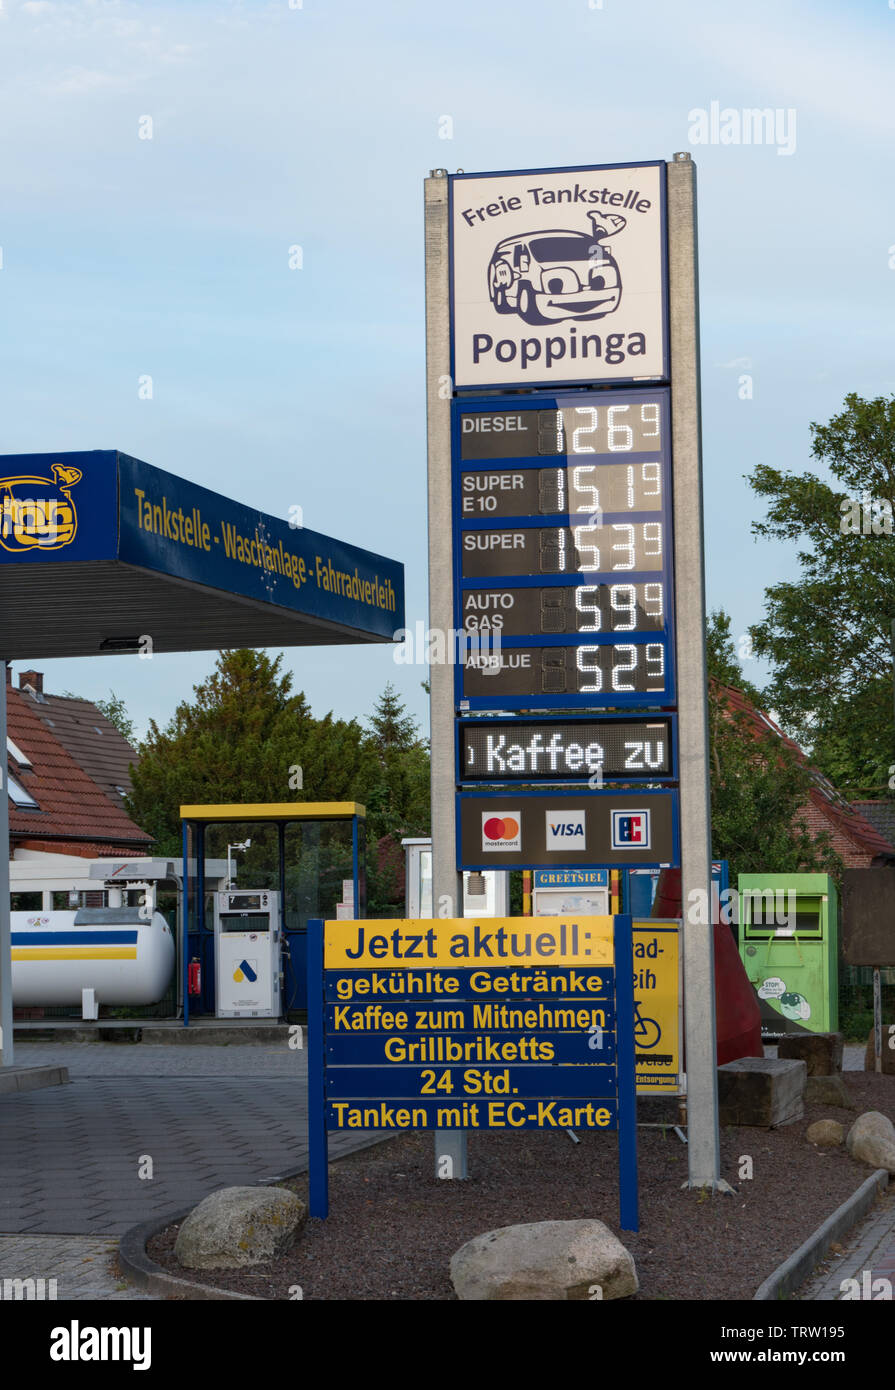 Prices on garage forecourt. East Frisis, Germany, May 2019 Stock Photo